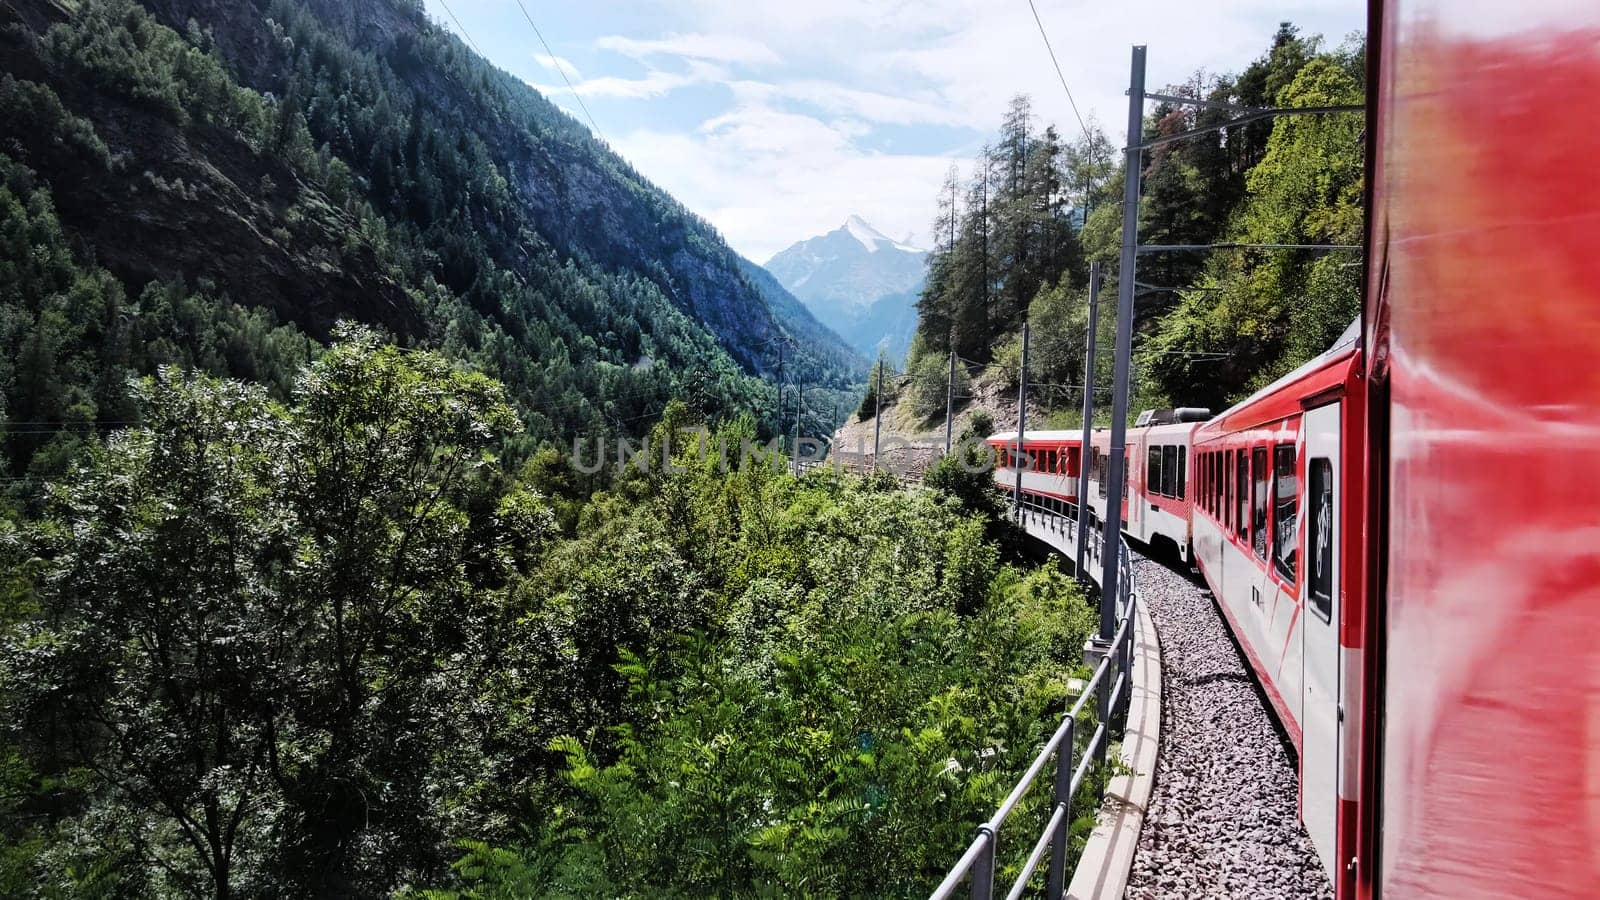 Red Swiss Train Moving By Valley In Mountains by GekaSkr